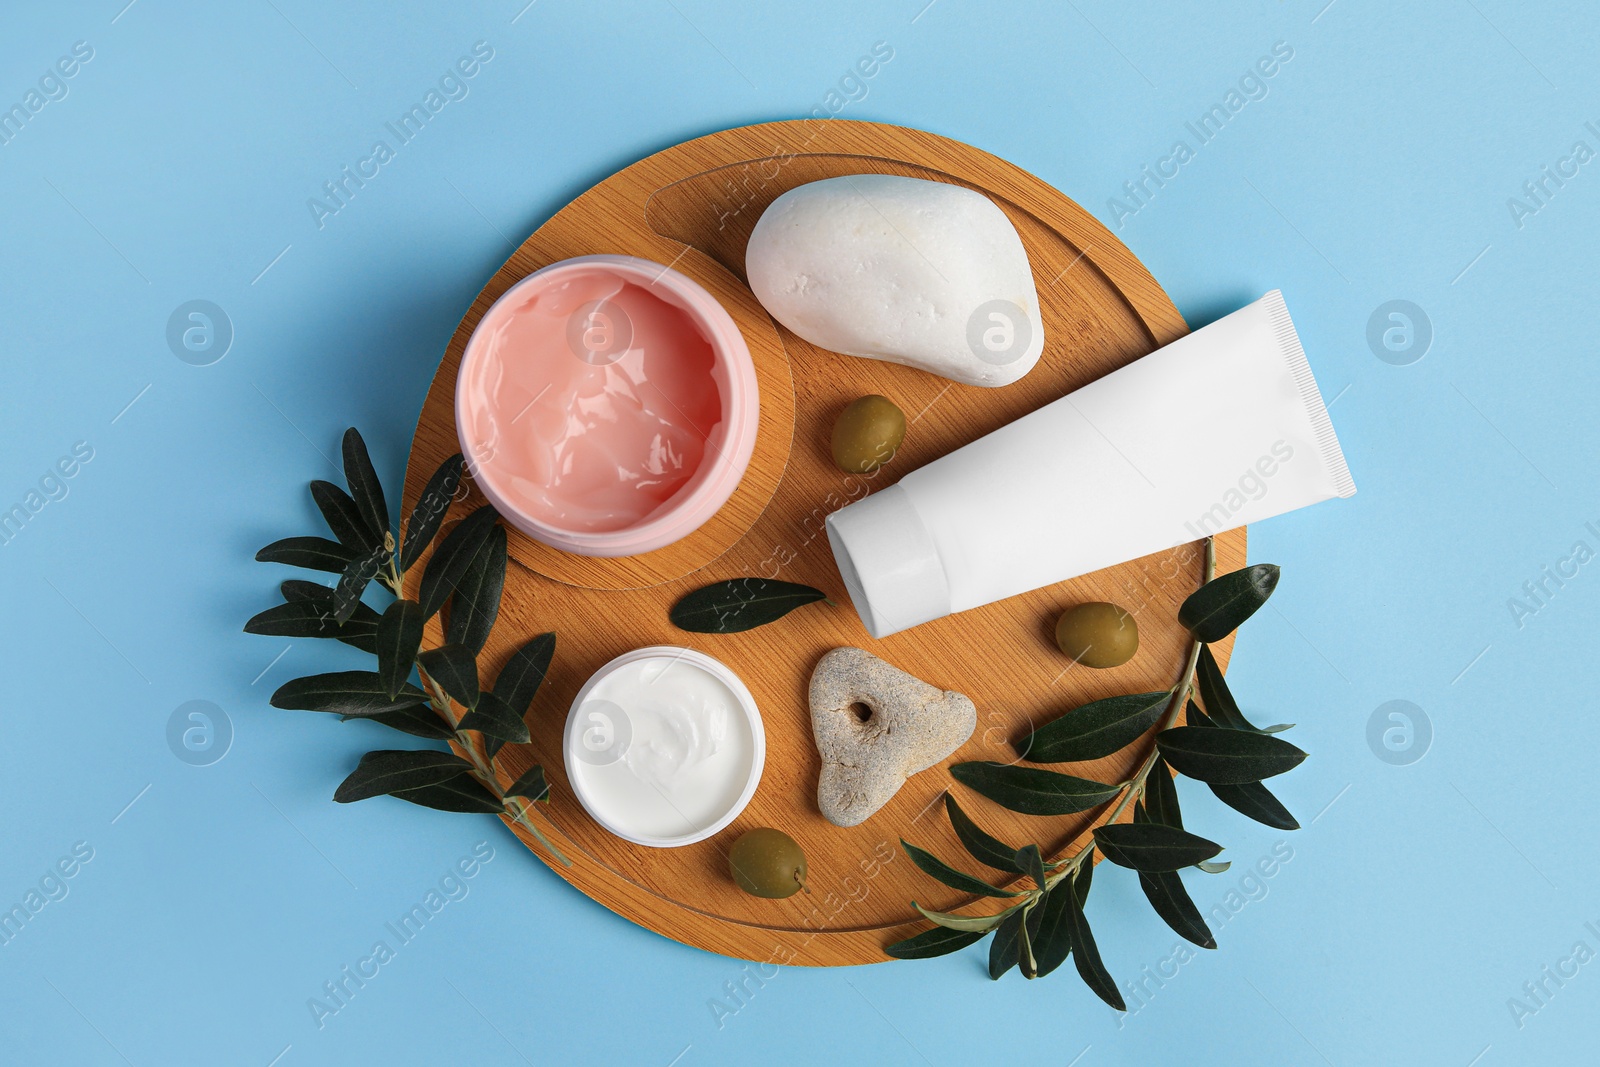 Photo of Different cosmetic products with olives and stones on light blue background, top view